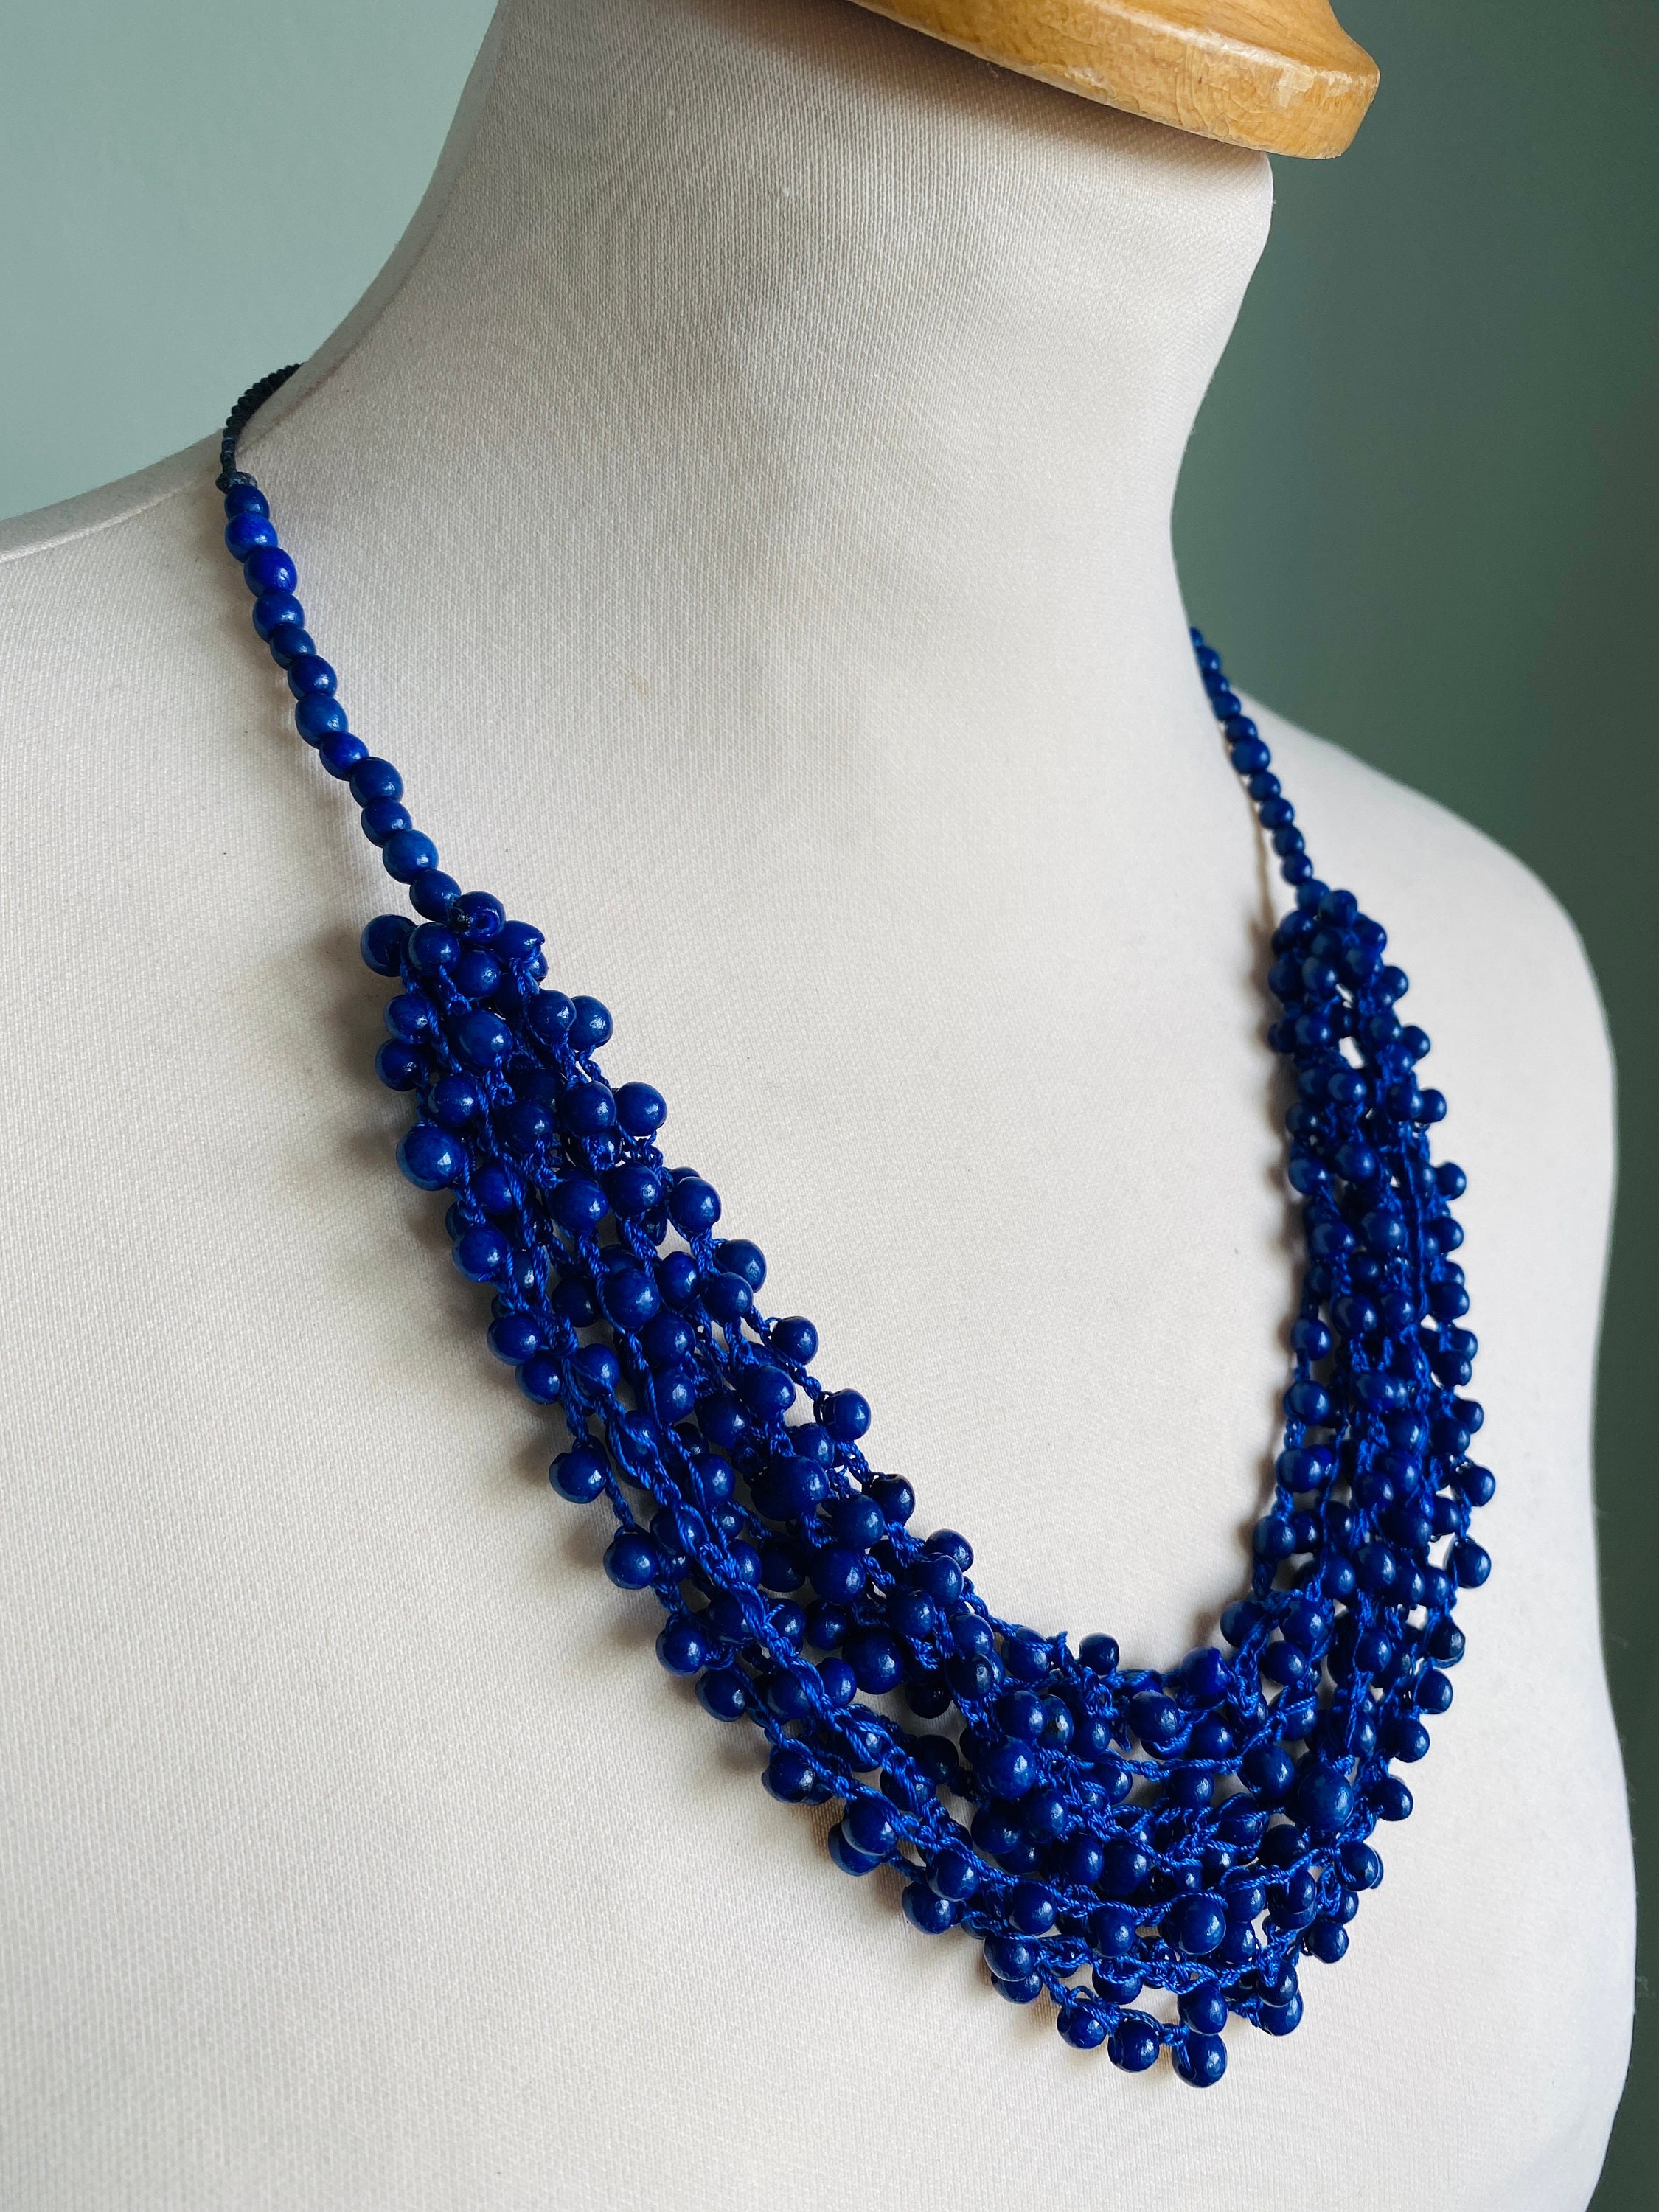 Adjustable Length Bib Necklace Statement Necklace Joyería Collares Collares babero Letterbox gifts Chunky bead Necklace Cobalt Blue Necklace Geometric Curve Necklace 